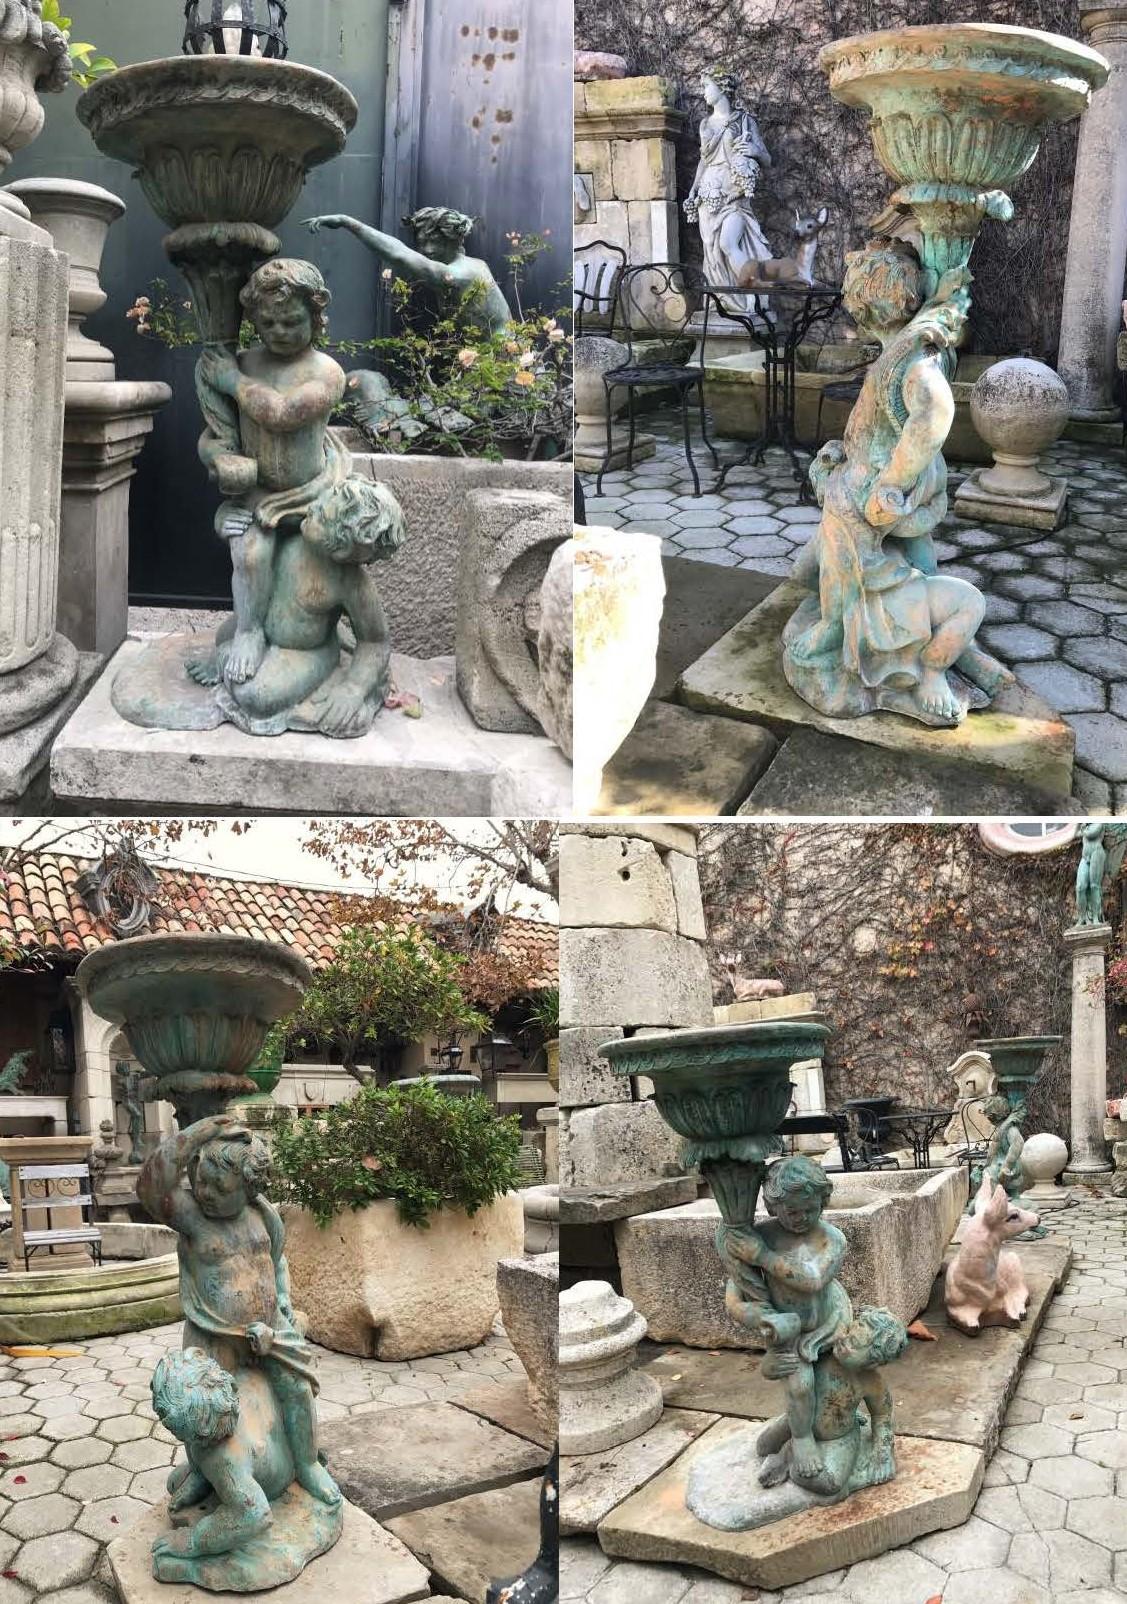 Very nicely done late 19th century cast bronze garden putties jardinière
The figures of two Angelo's at play holding a vase urn . children at play cherub or a cupid in Renaissance art . They could be used around the pool area or mounted on a